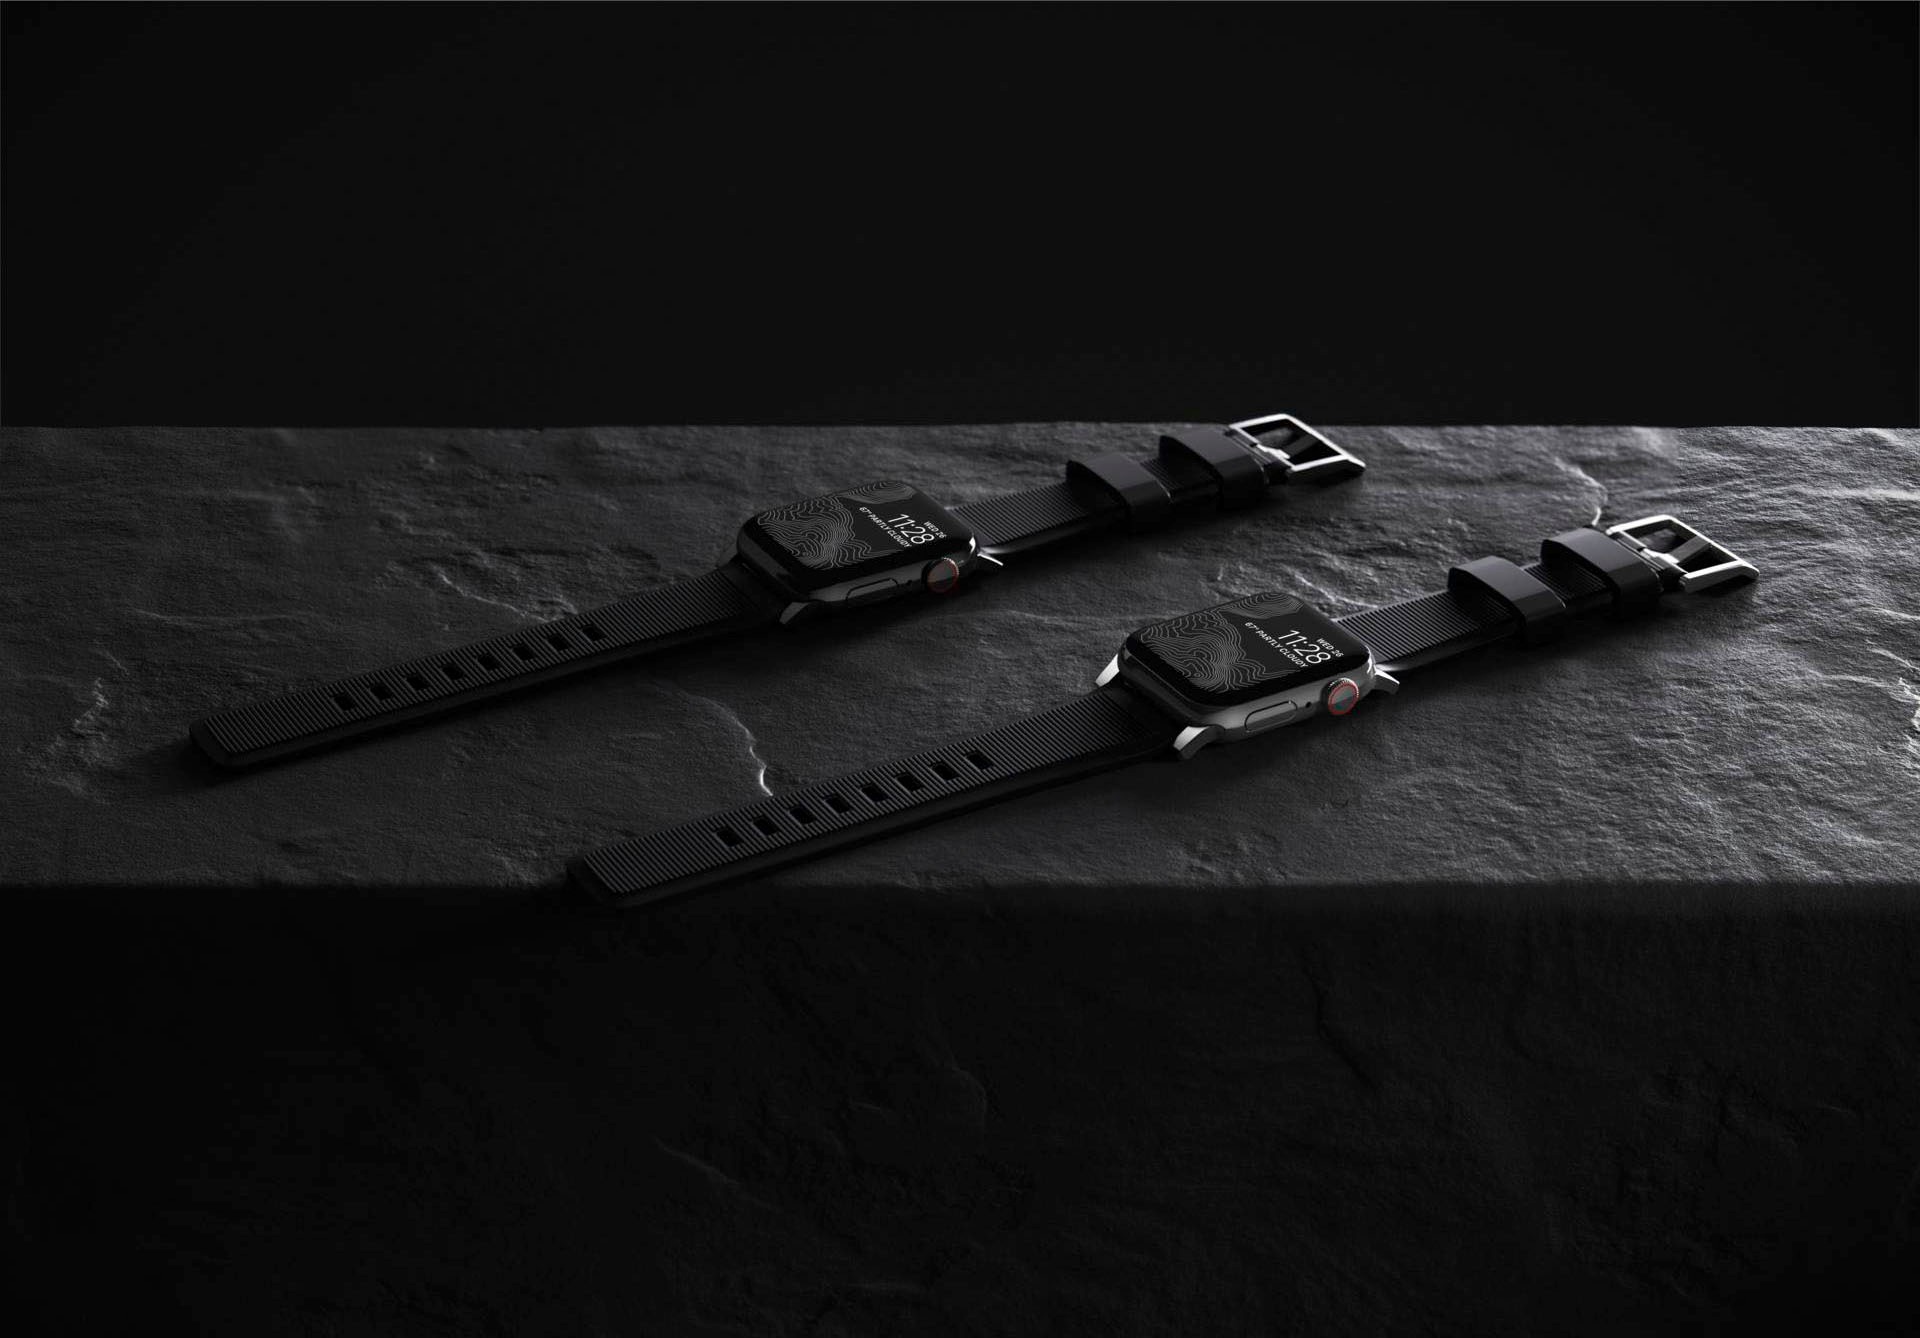 Nomad Smartwatch-Armband »Strap Rugged Connector 42/44/45/49mm«